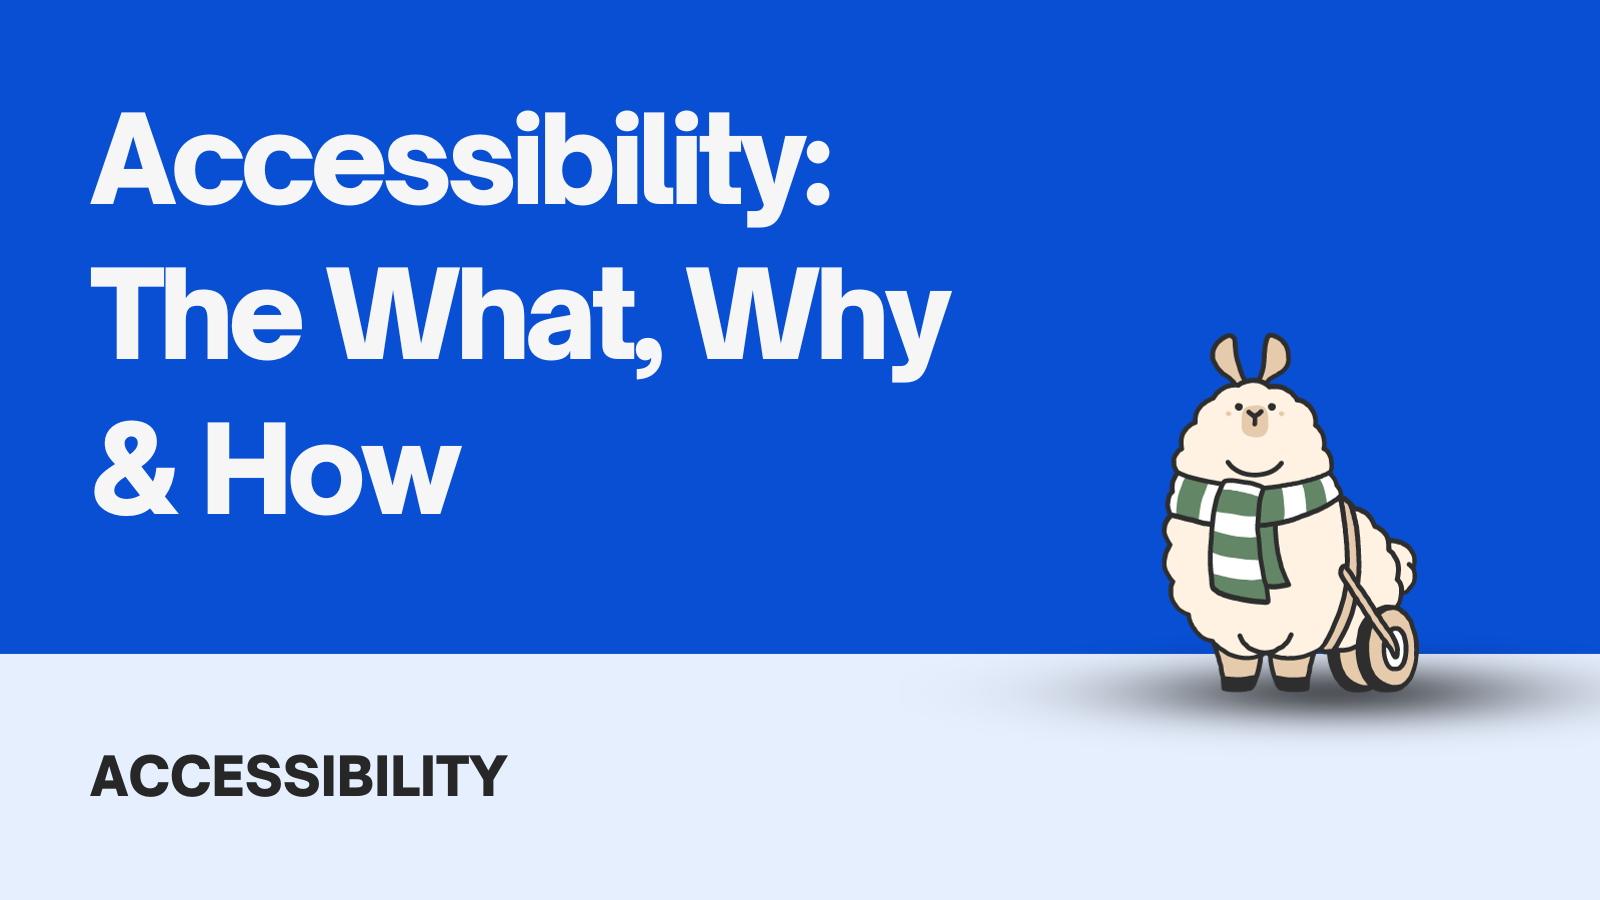 Accessibility: The What, Why & How